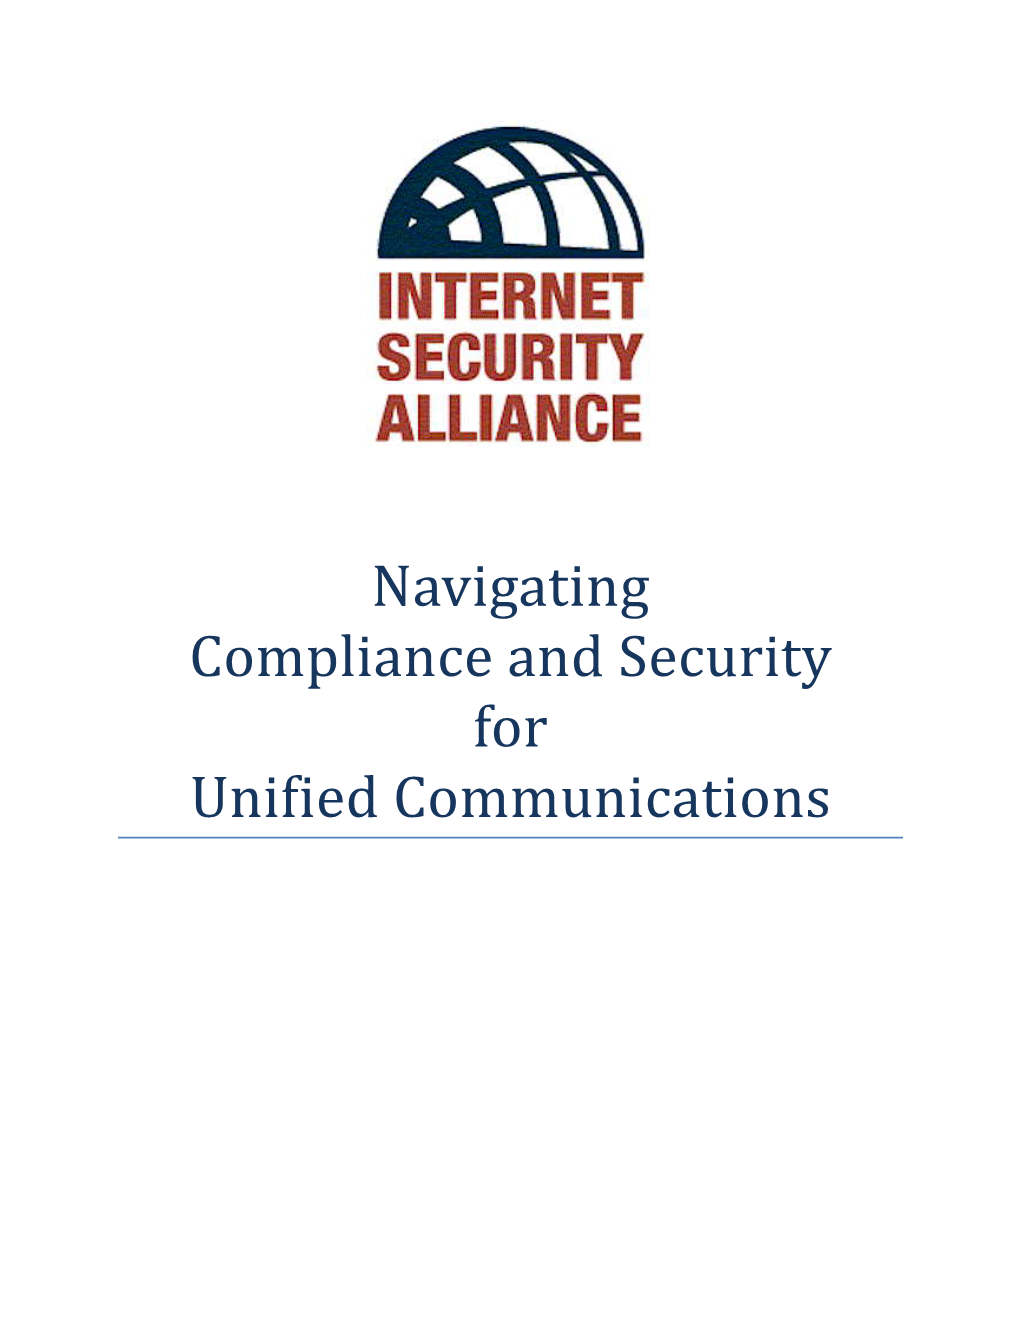 Nav Ng Igati Compliance and Security for Unified Communications